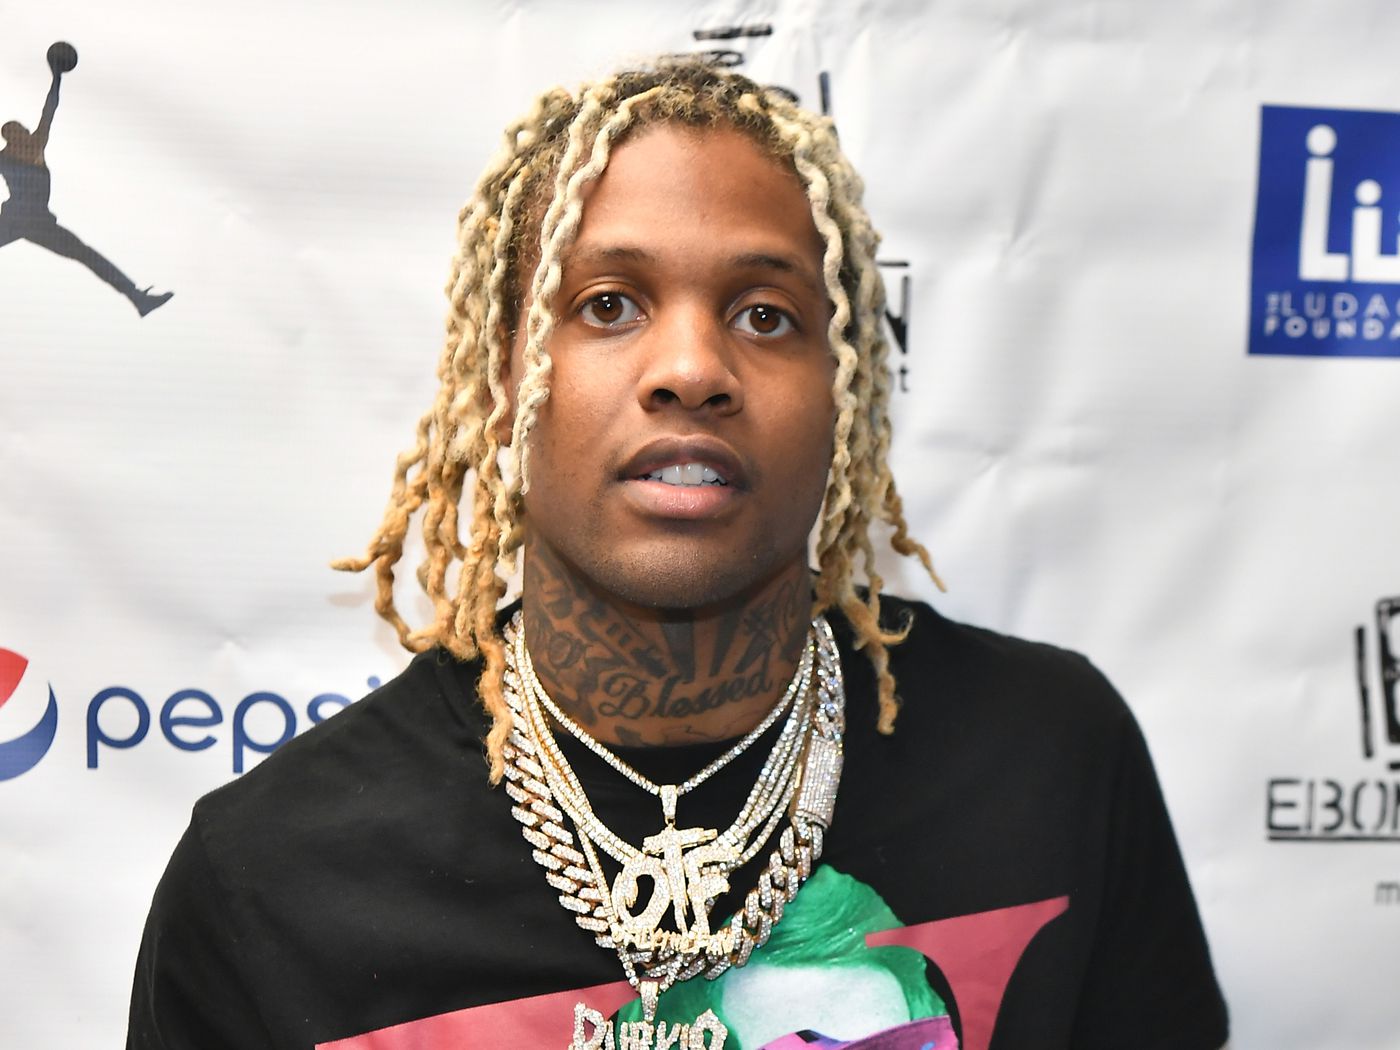 Lil Durk Most Featured 2022 Rapper